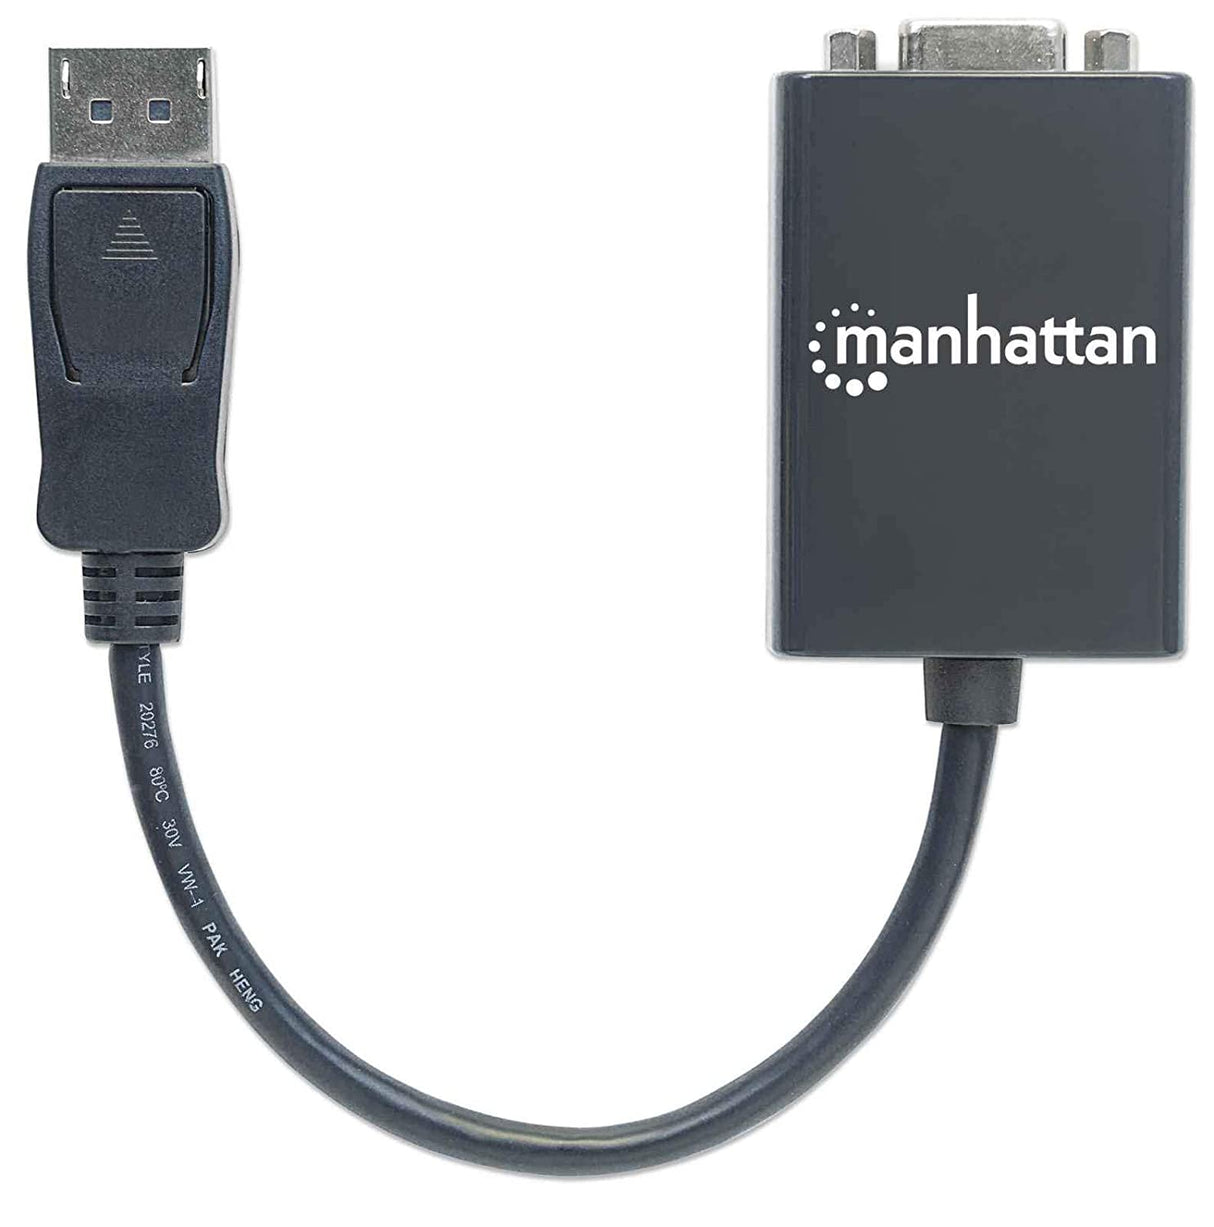 Manhattan DisplayPort to VGA converter cable, DisplayPort male to VGA HD15 female adapter, 6 inch, active, black ICI151962 - MANHATTAN 151962 DisplayPort to VGA Converter Cable